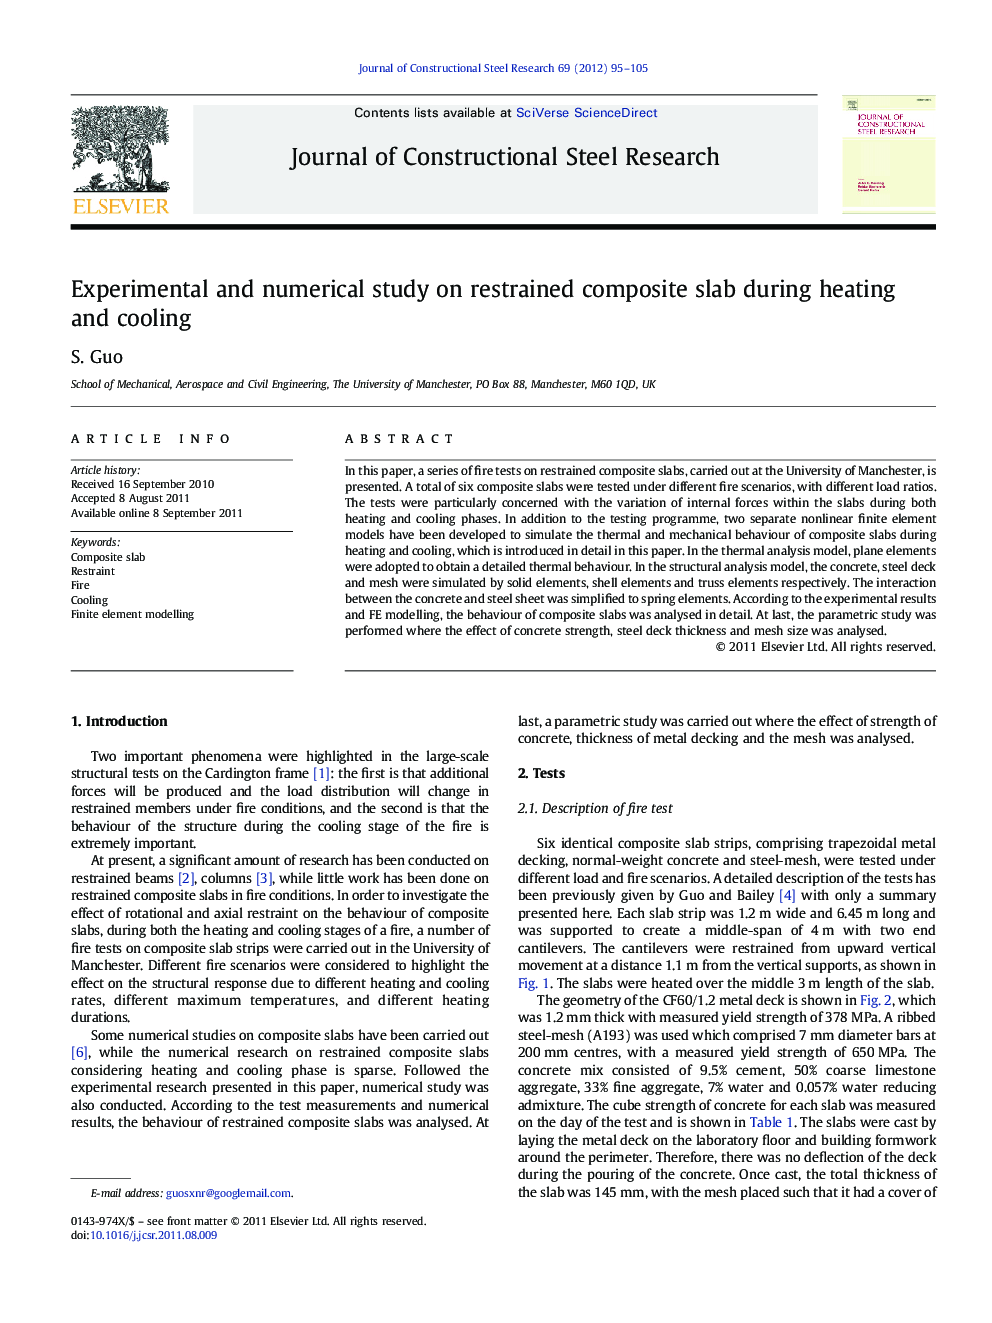 Experimental and numerical study on restrained composite slab during heating and cooling